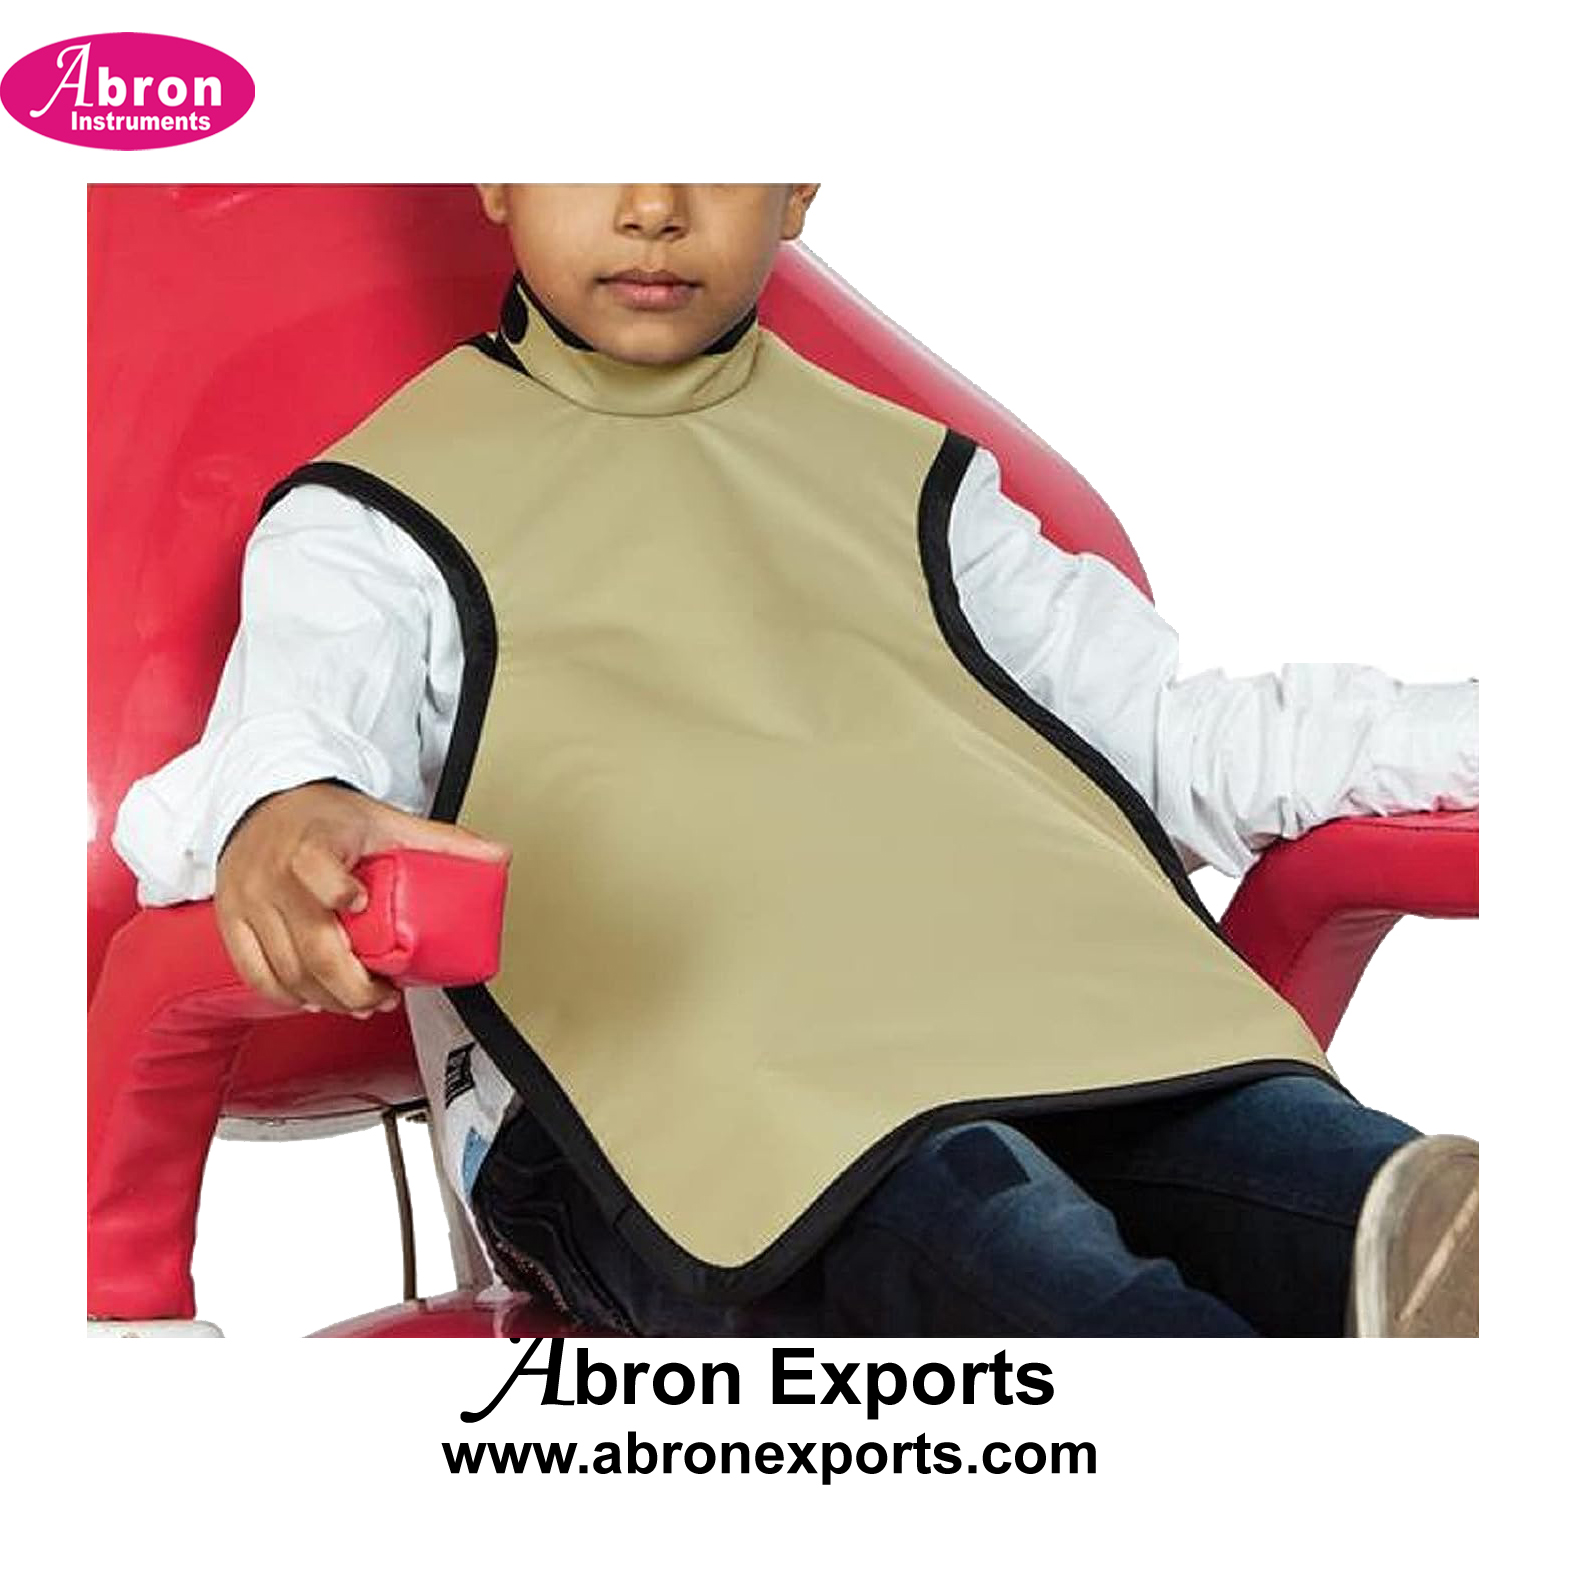 X-Ray Radiation Lead Apron with Collar for Pediatric Kids Children and Hanging Loops 0.3mm Lead Medical Grade Light weight Ergonomic Design Abron ABM-2790AP 